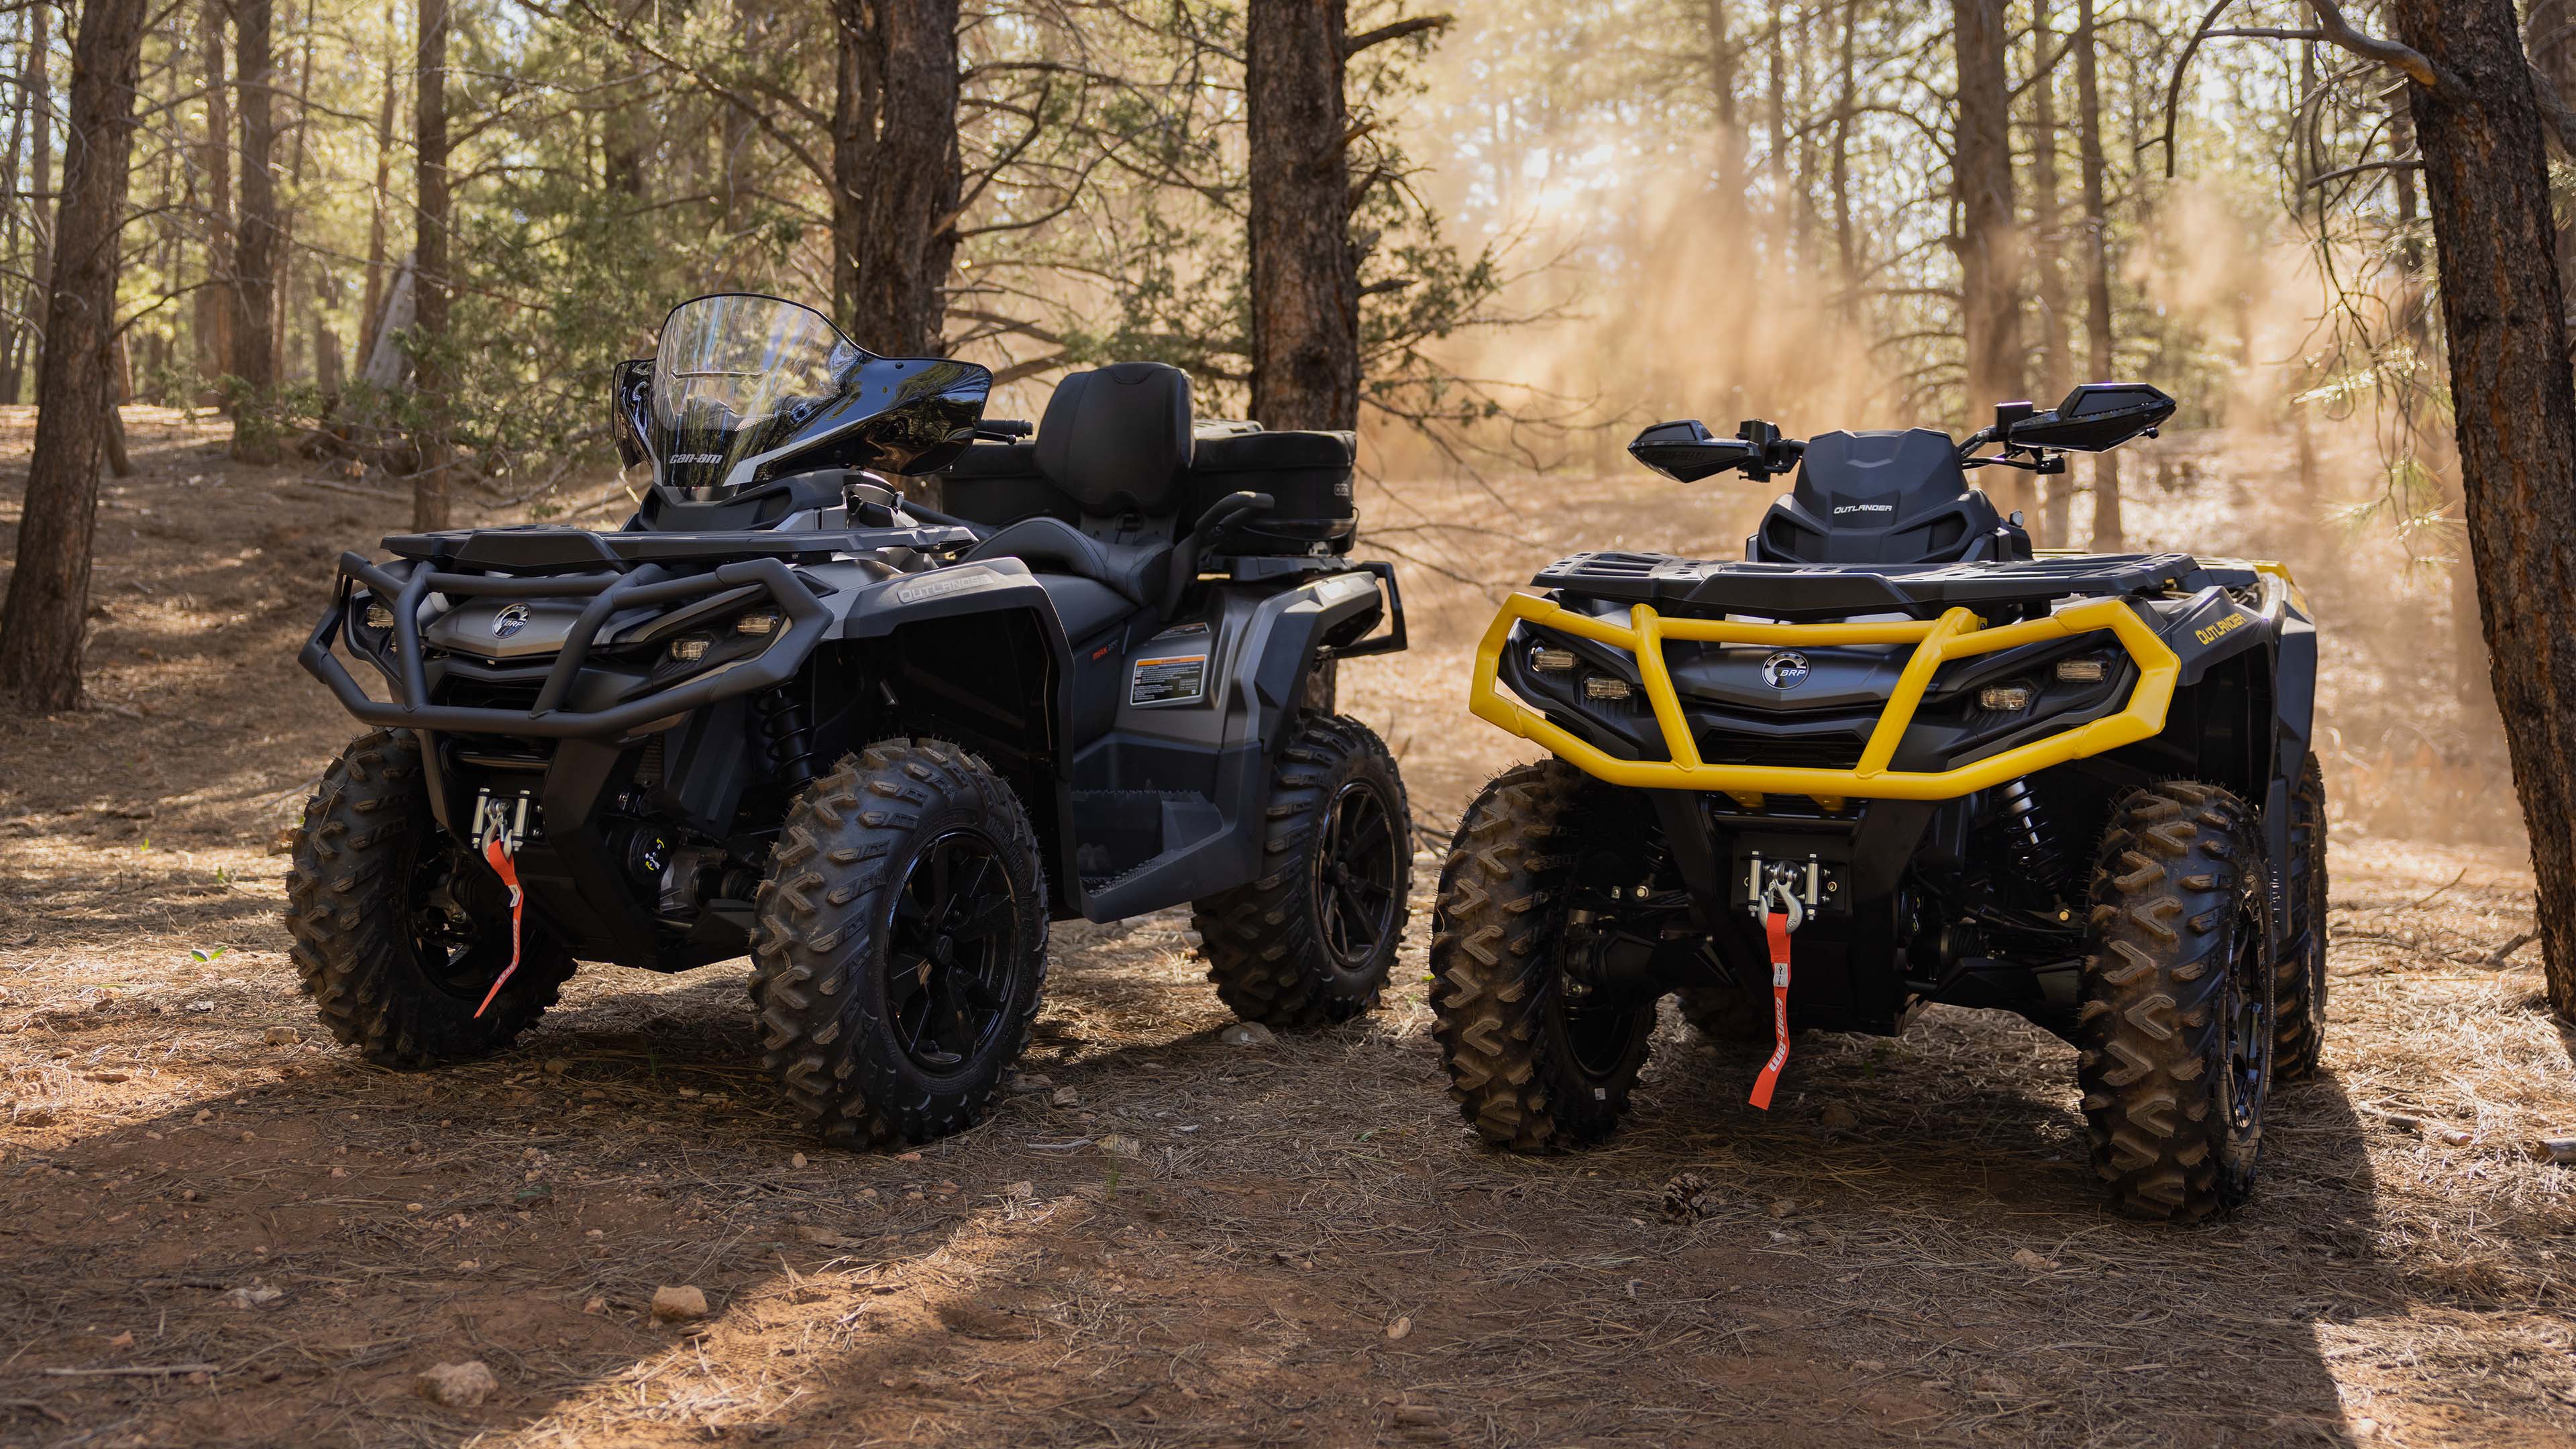 Two Can-Am Outlander vehicles